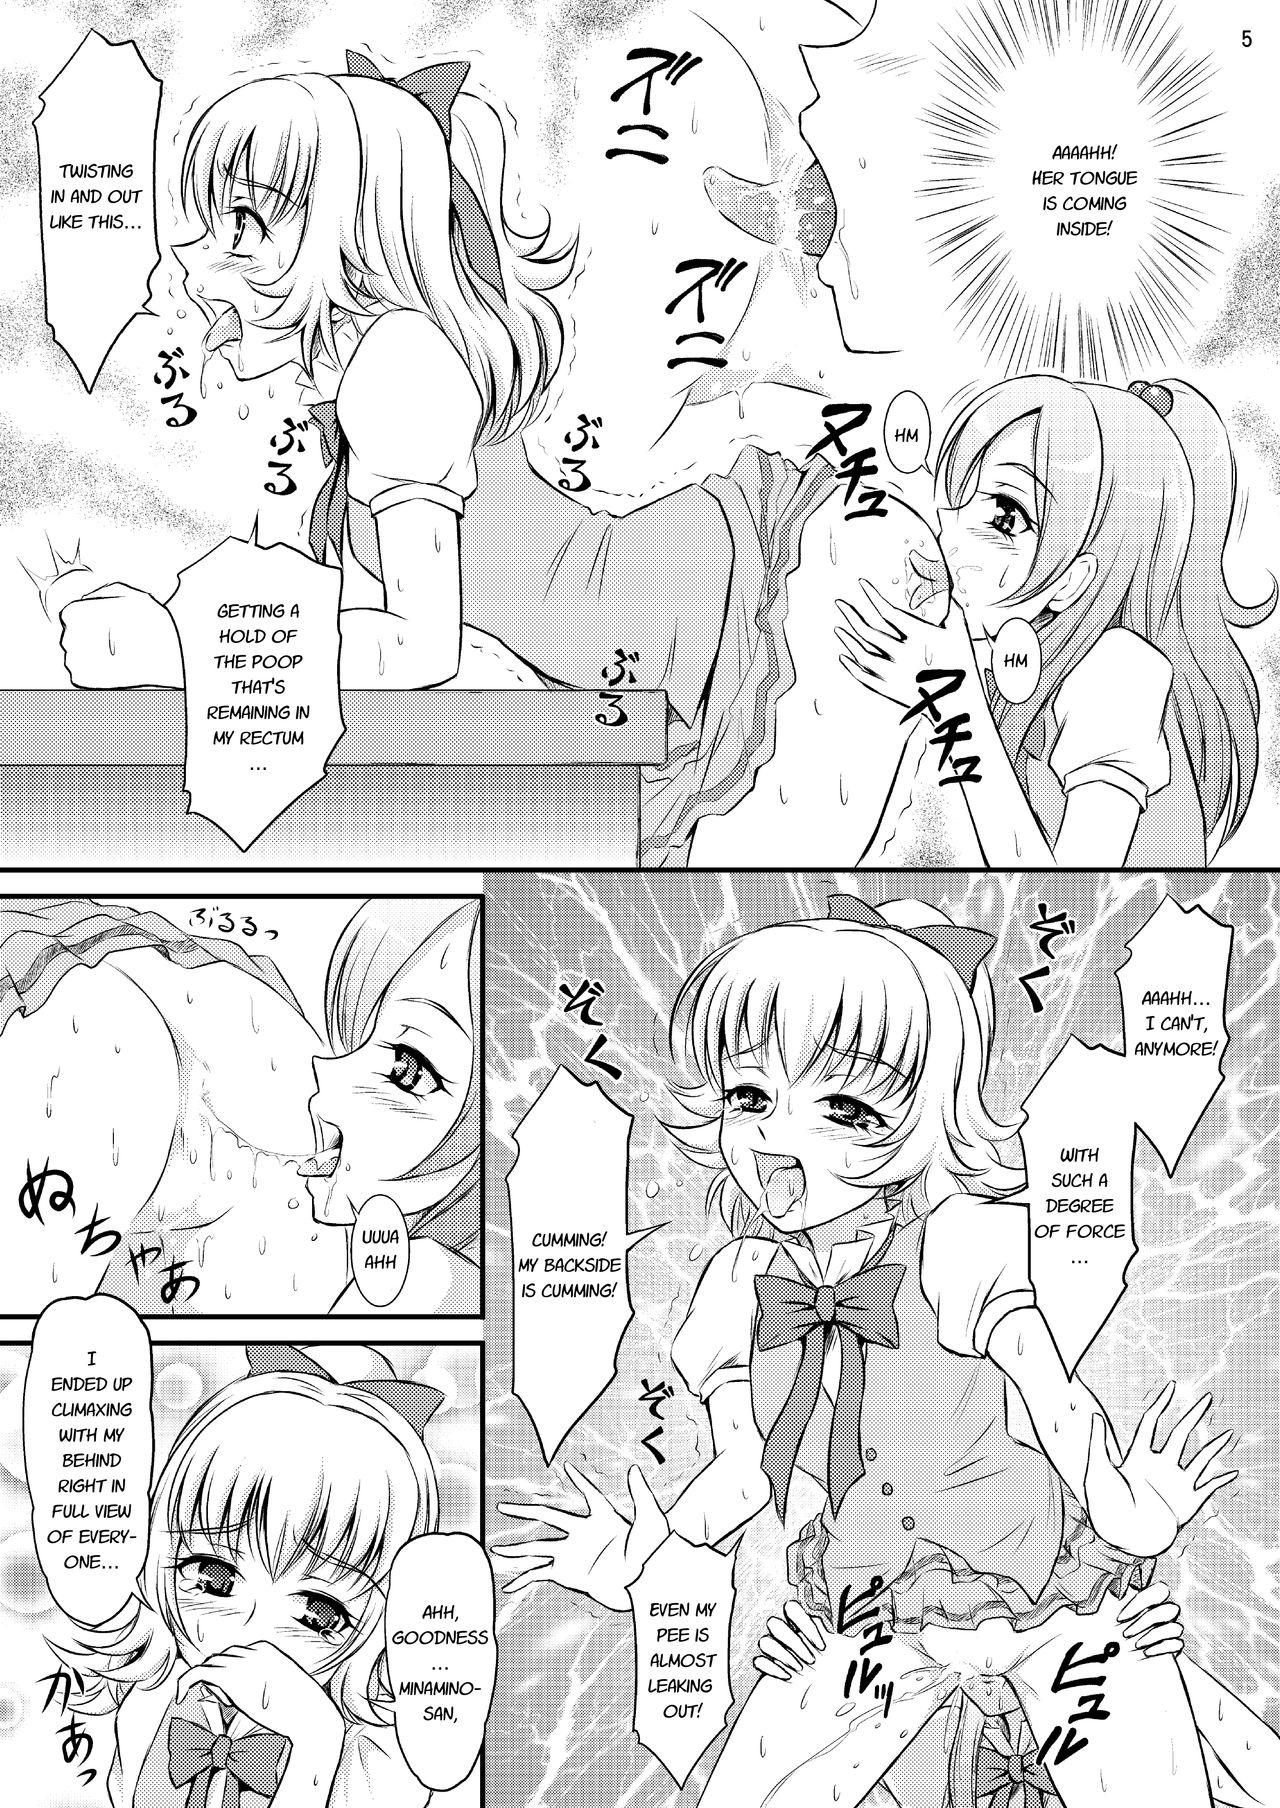 Toying Sweets' Hime no Himitsu Recipe - Suite precure Mama - Page 6